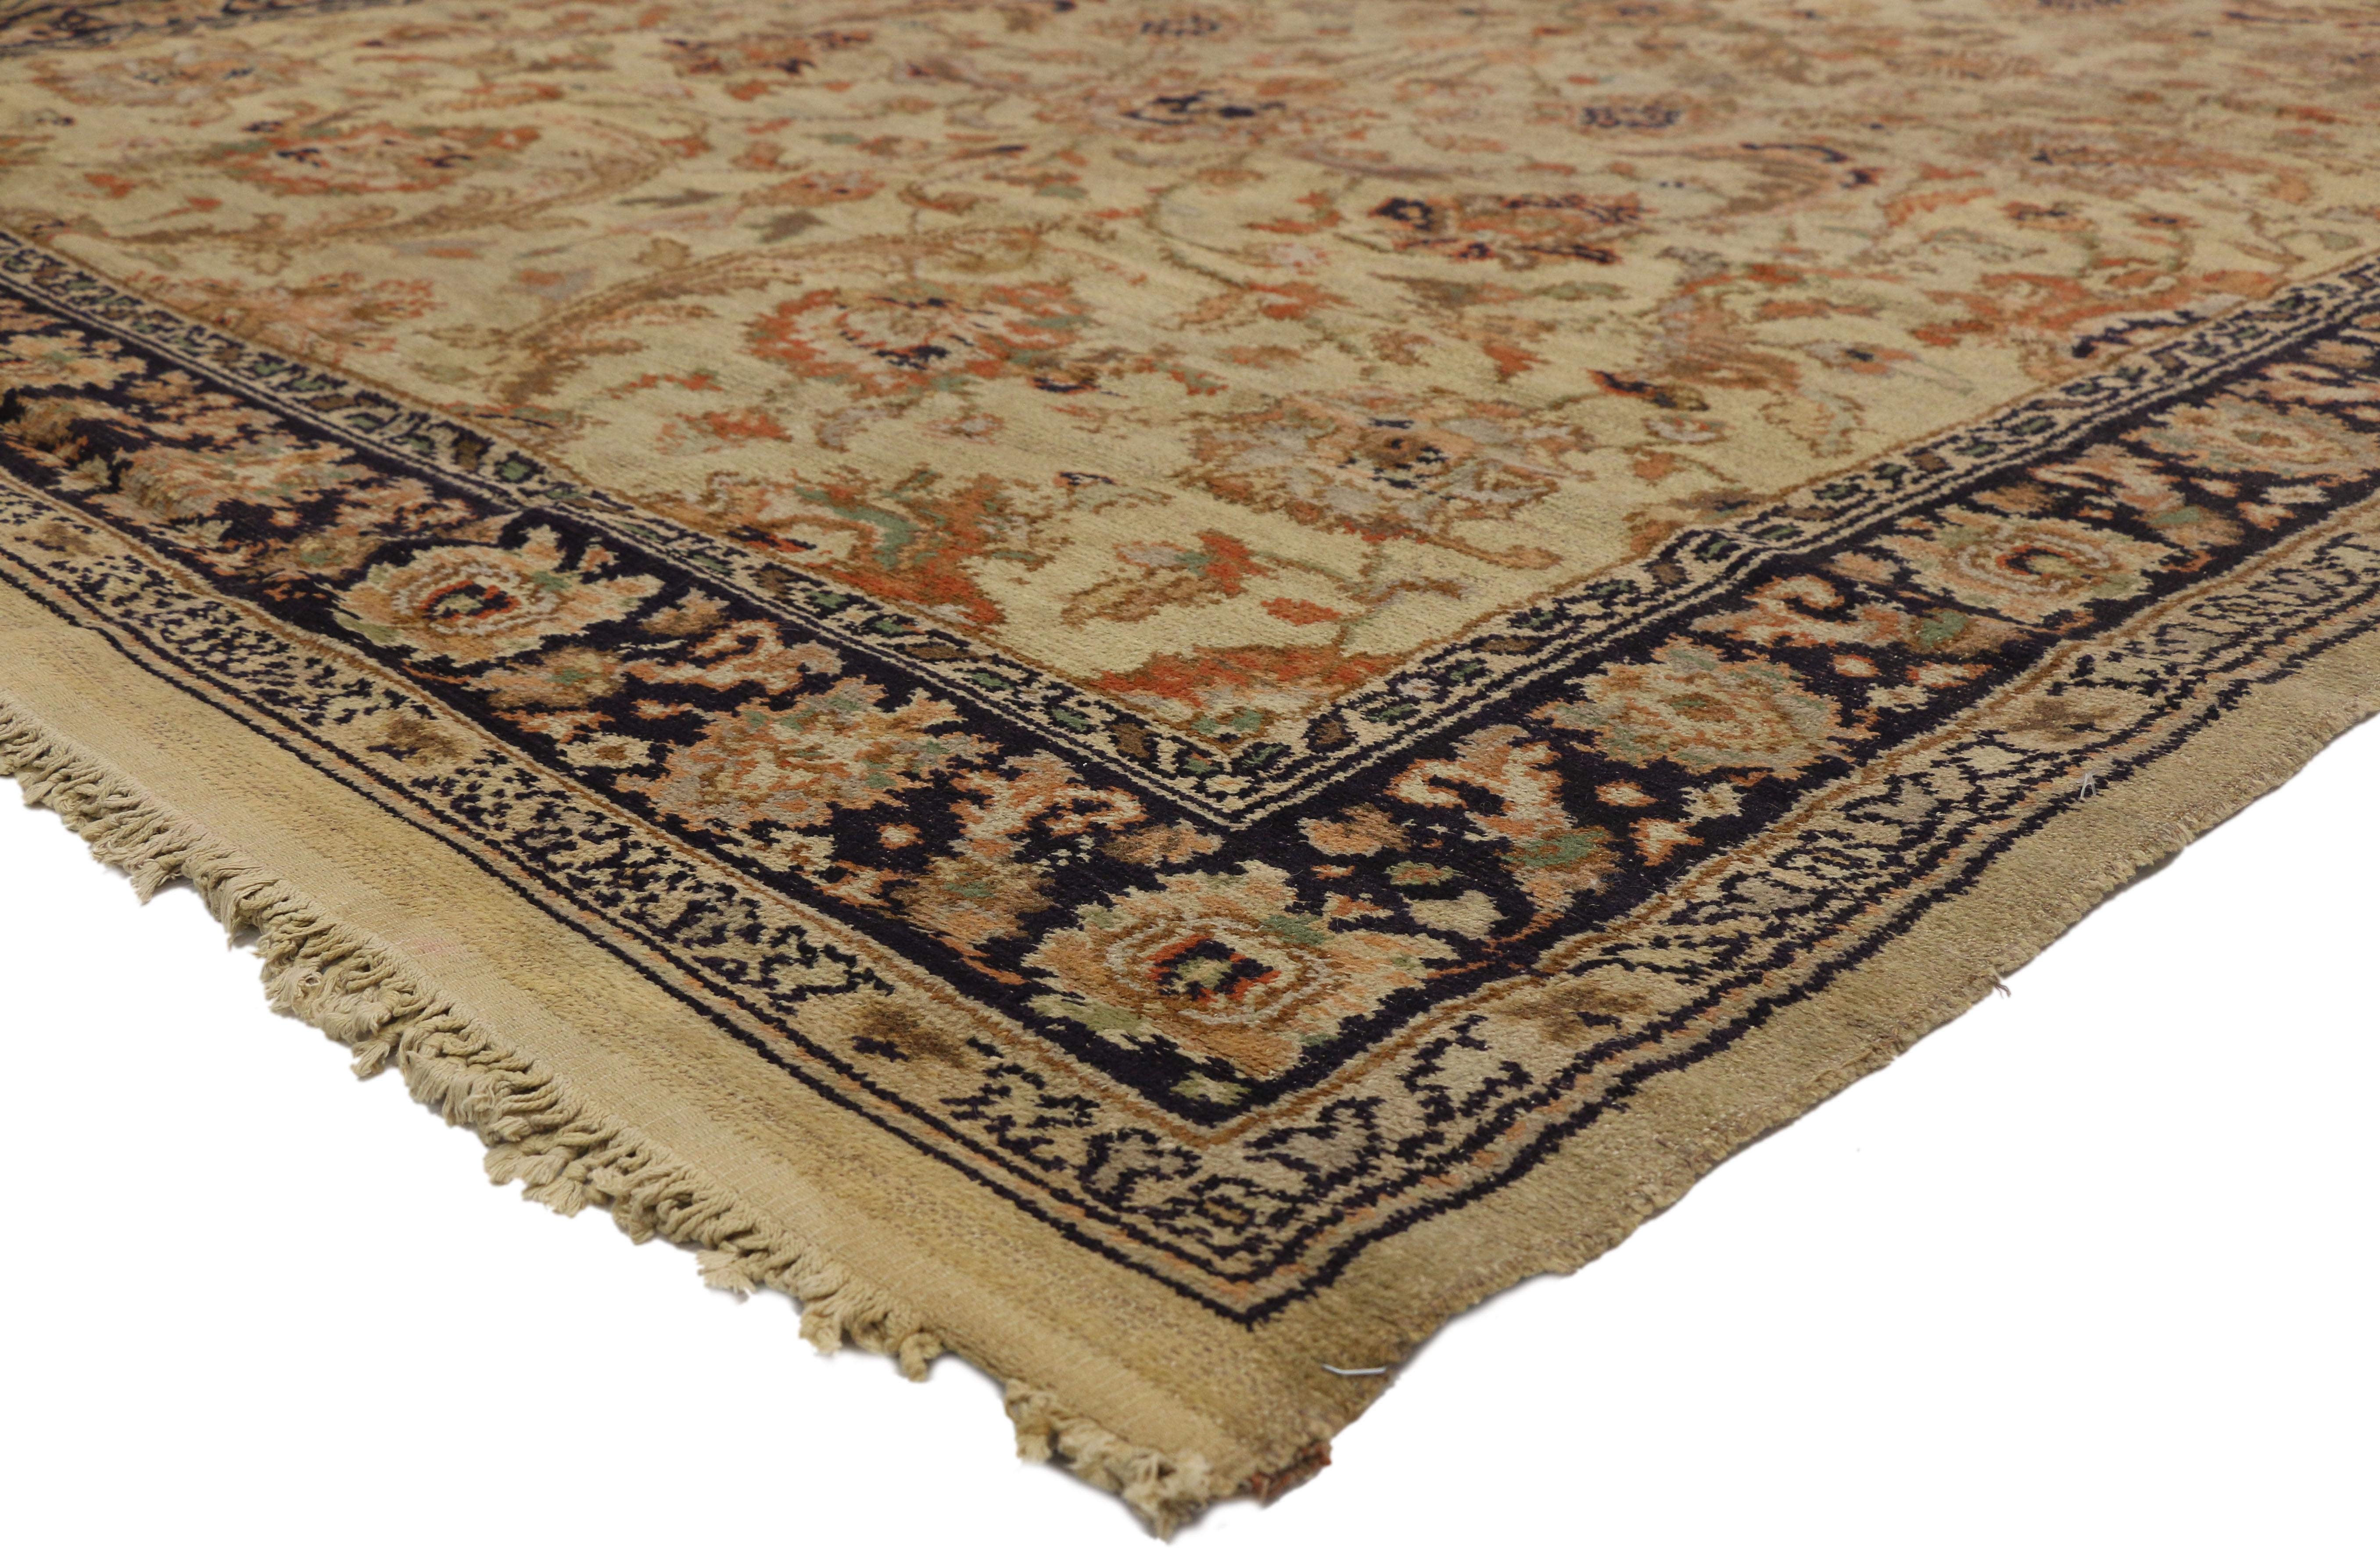 73196 Distressed Antique European Spanish Area Rug with Arts & Crafts Style 07'10 x 11'04. This hand knotted wool distressed antique European Spanish area rug features a lively all-over floral pattern composed of lotus palmettes, Harshang motifs,